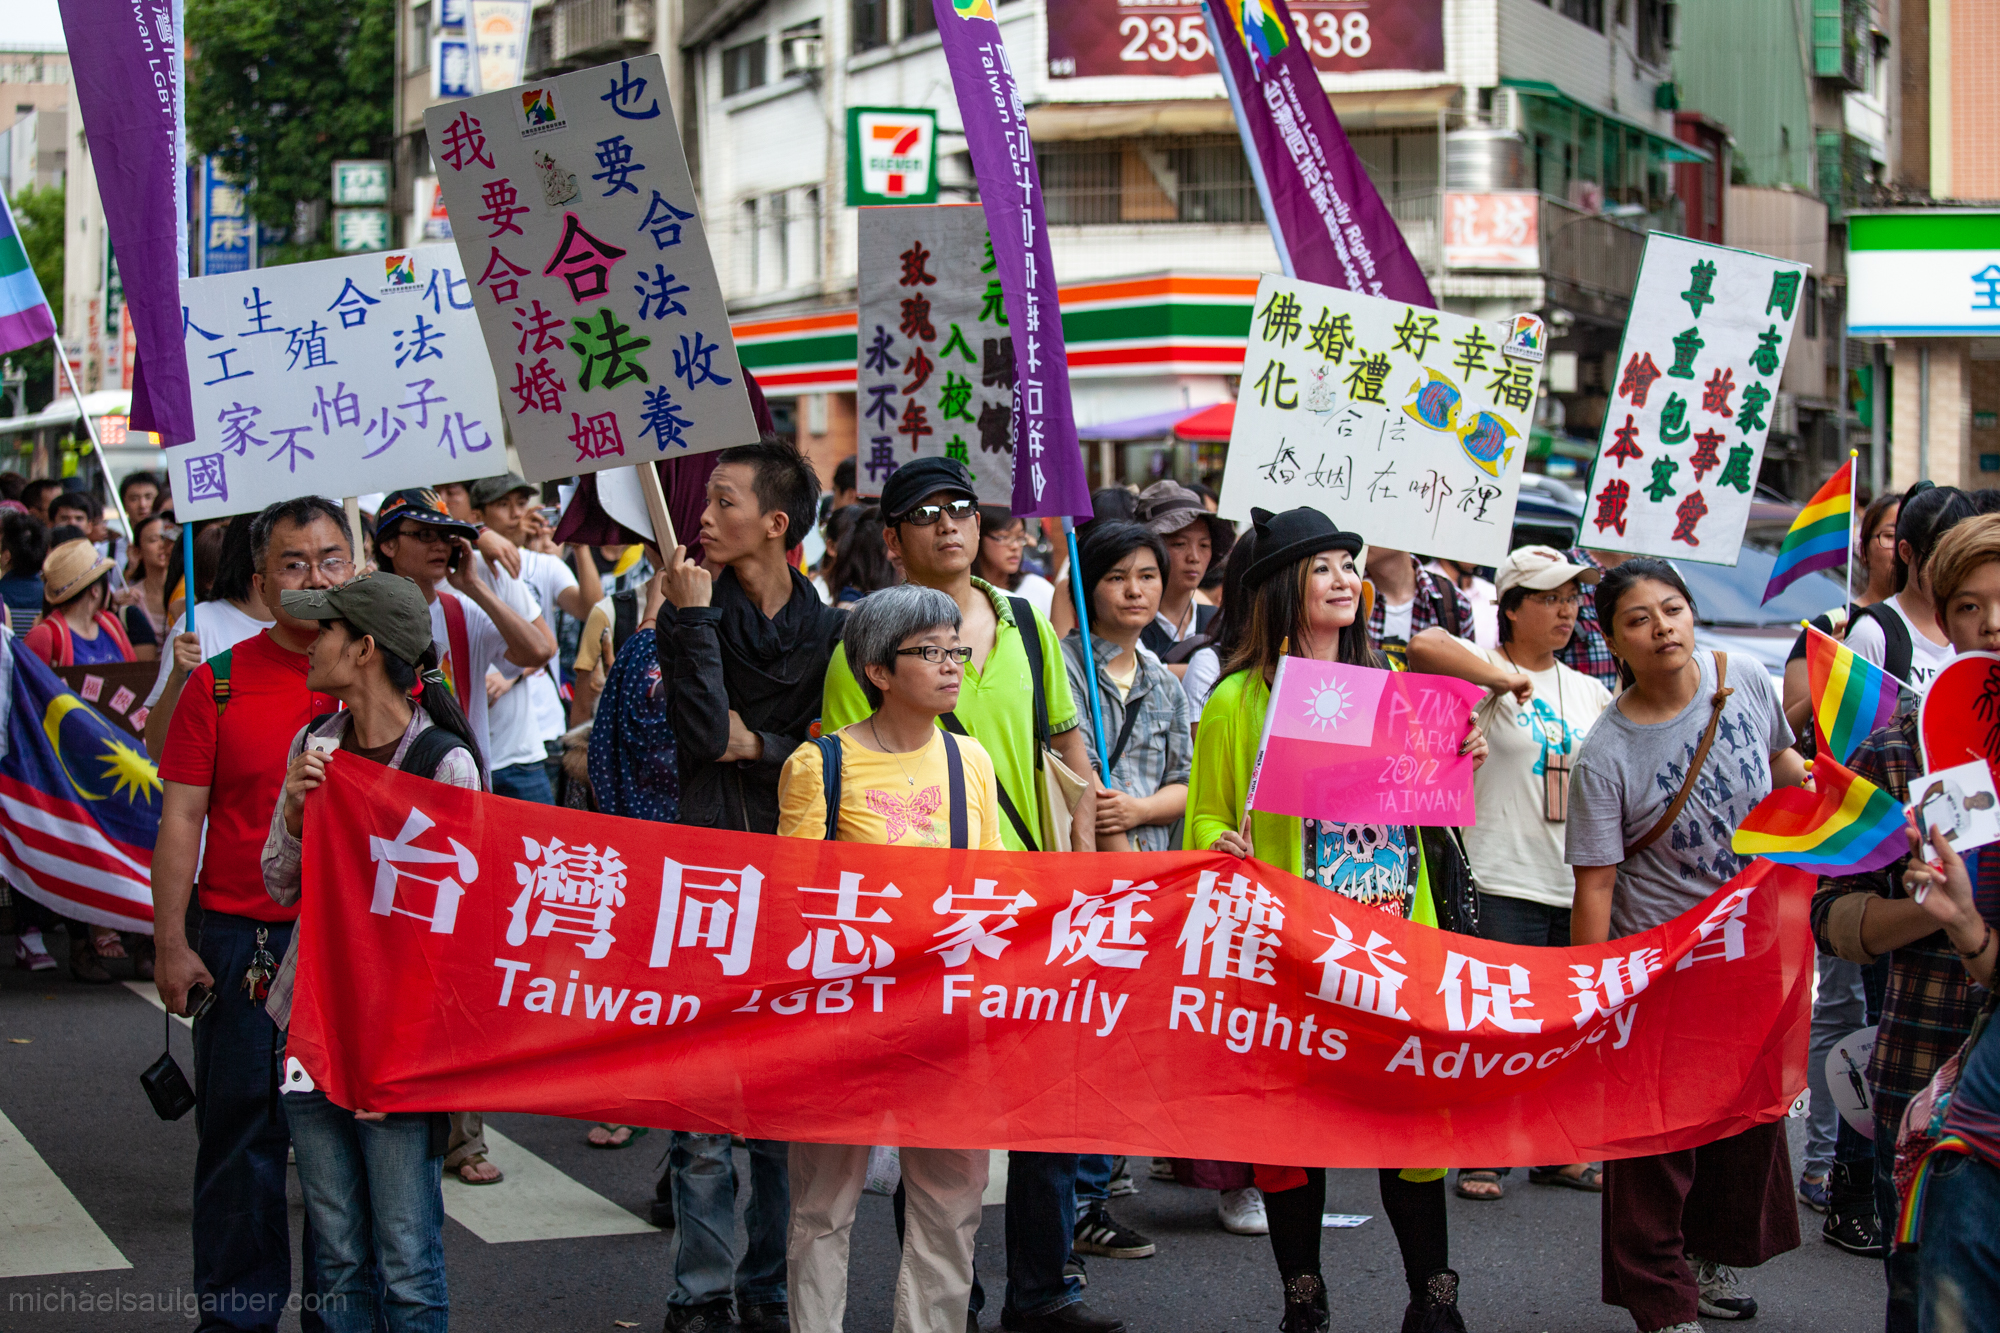 In 2012, the marriage equality movement started picking up steam. The following year, a same-sex marriage bill was brought to the legislature, but didn't pass committee. Taiwan Pride,2012